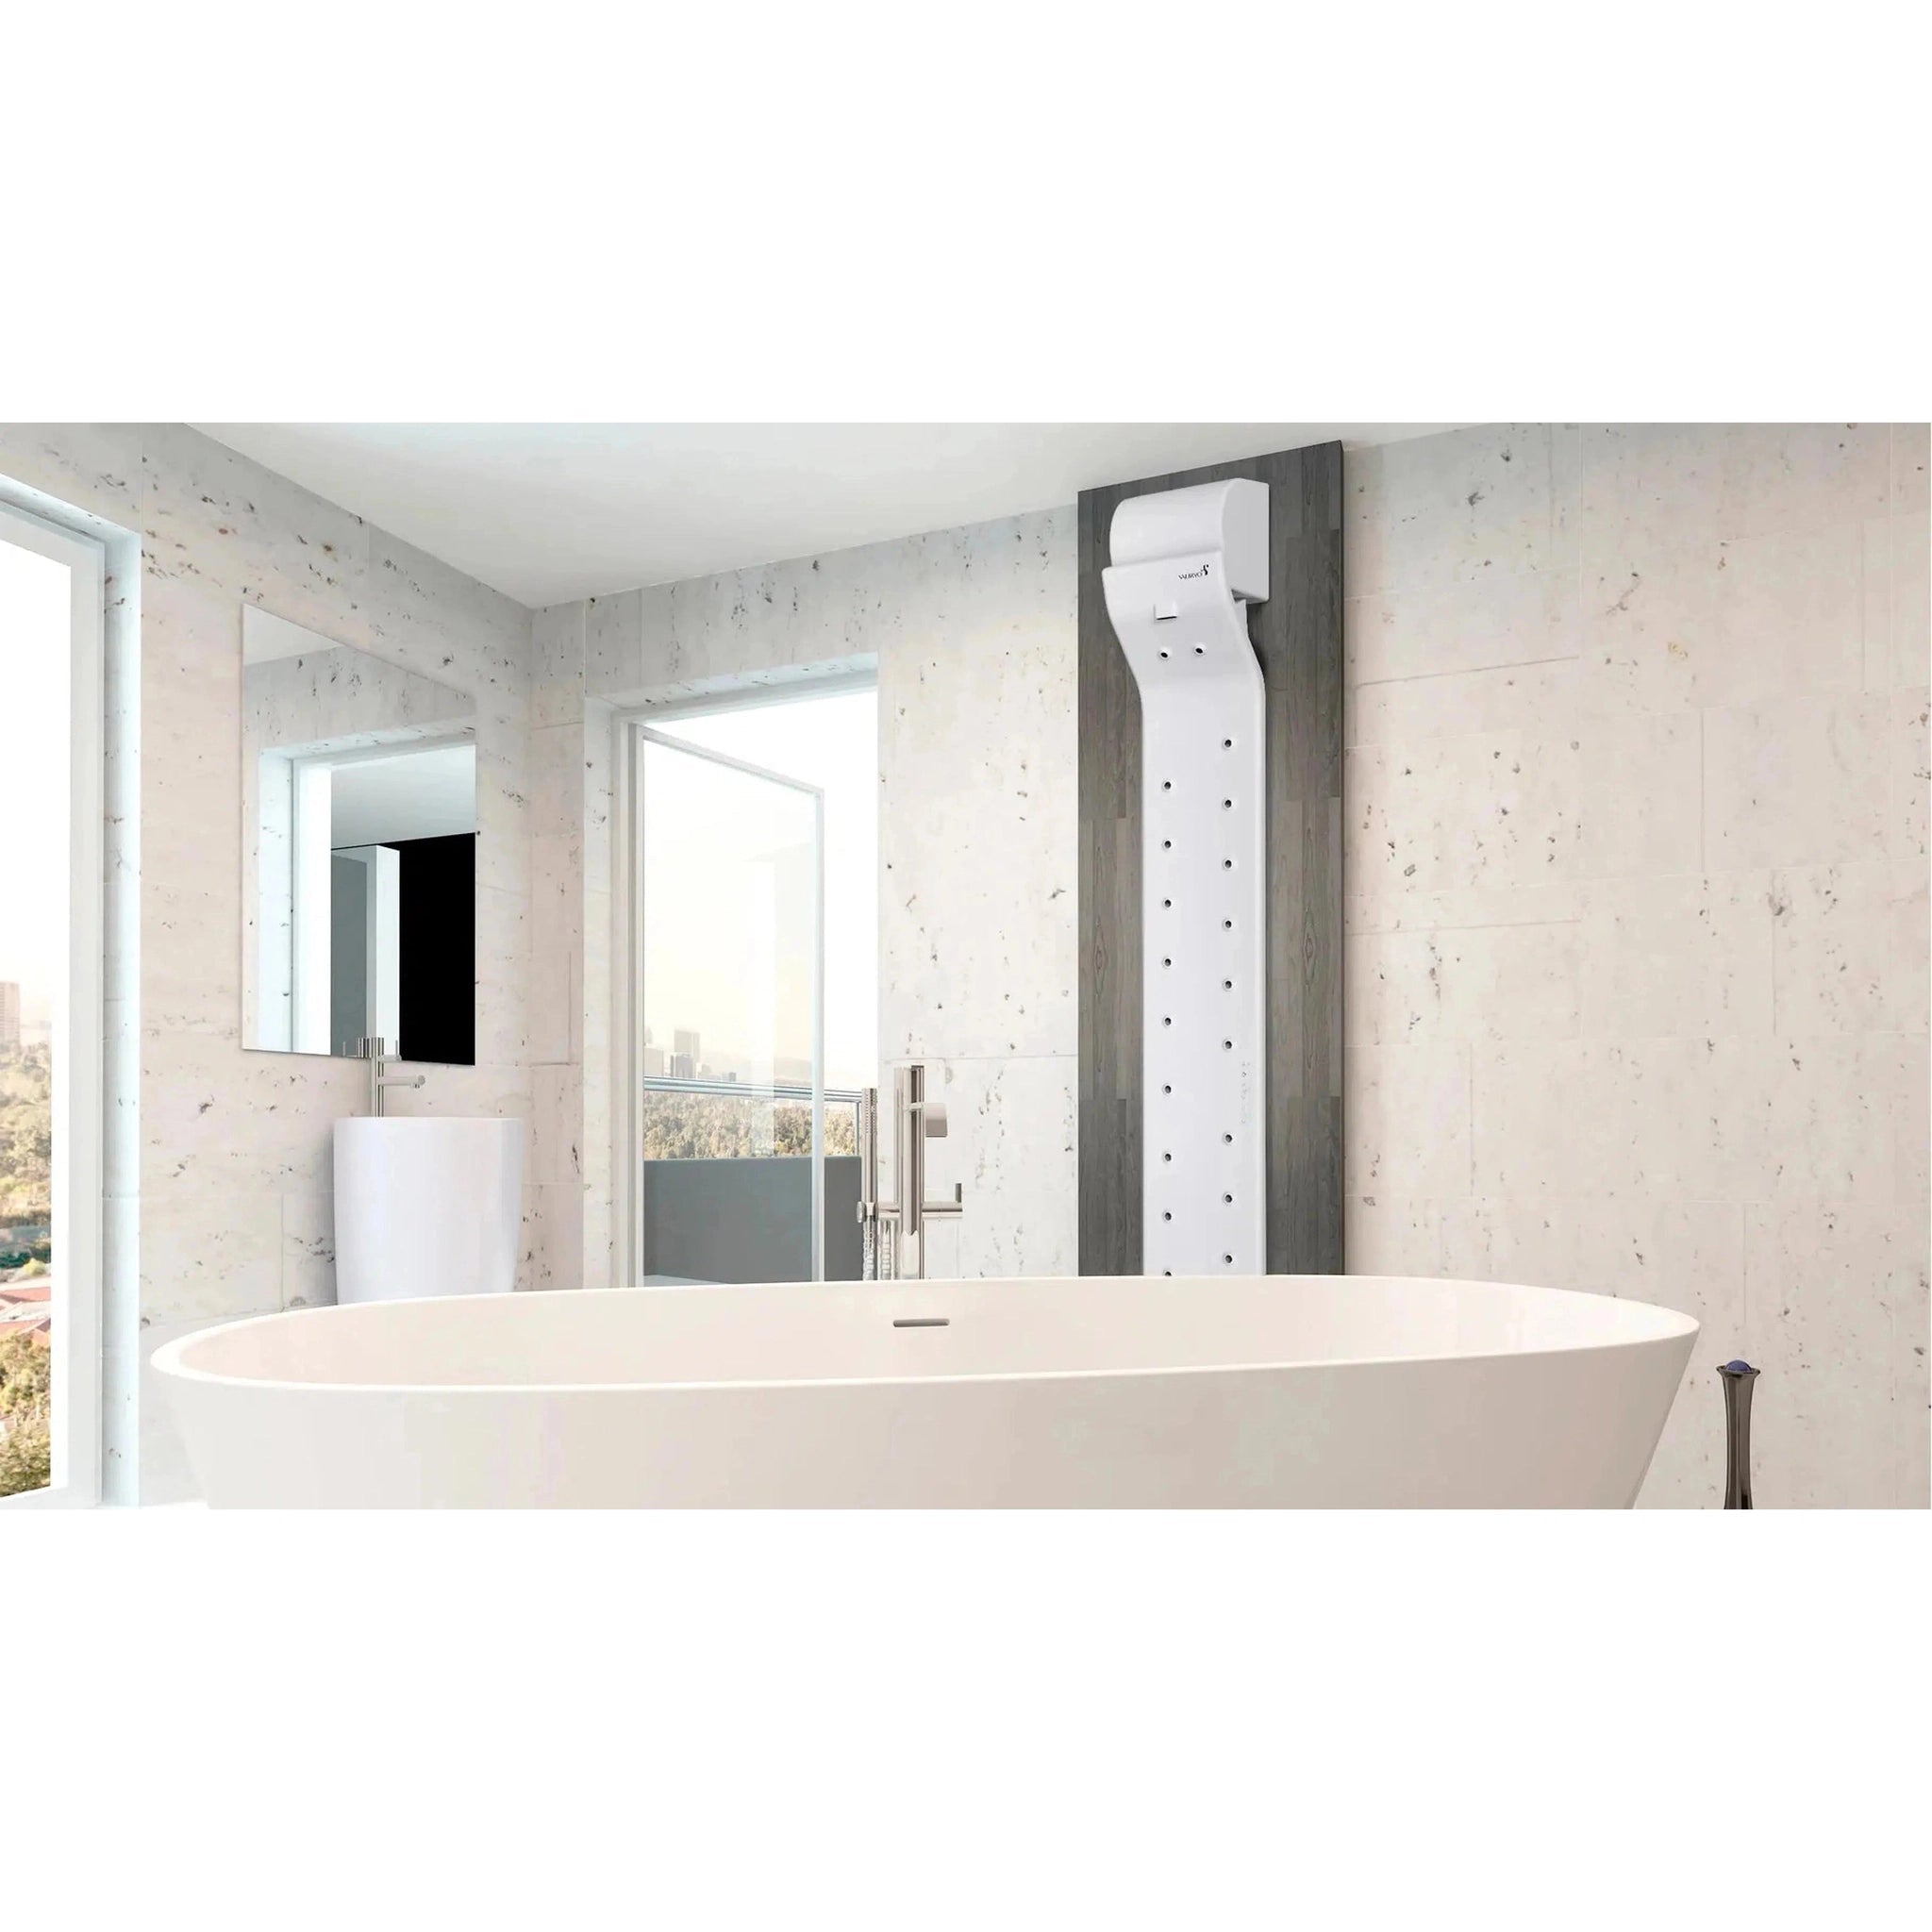 Valiryo 85 Matte White Wall-Mounted Fully Automated Full-Body Dryer